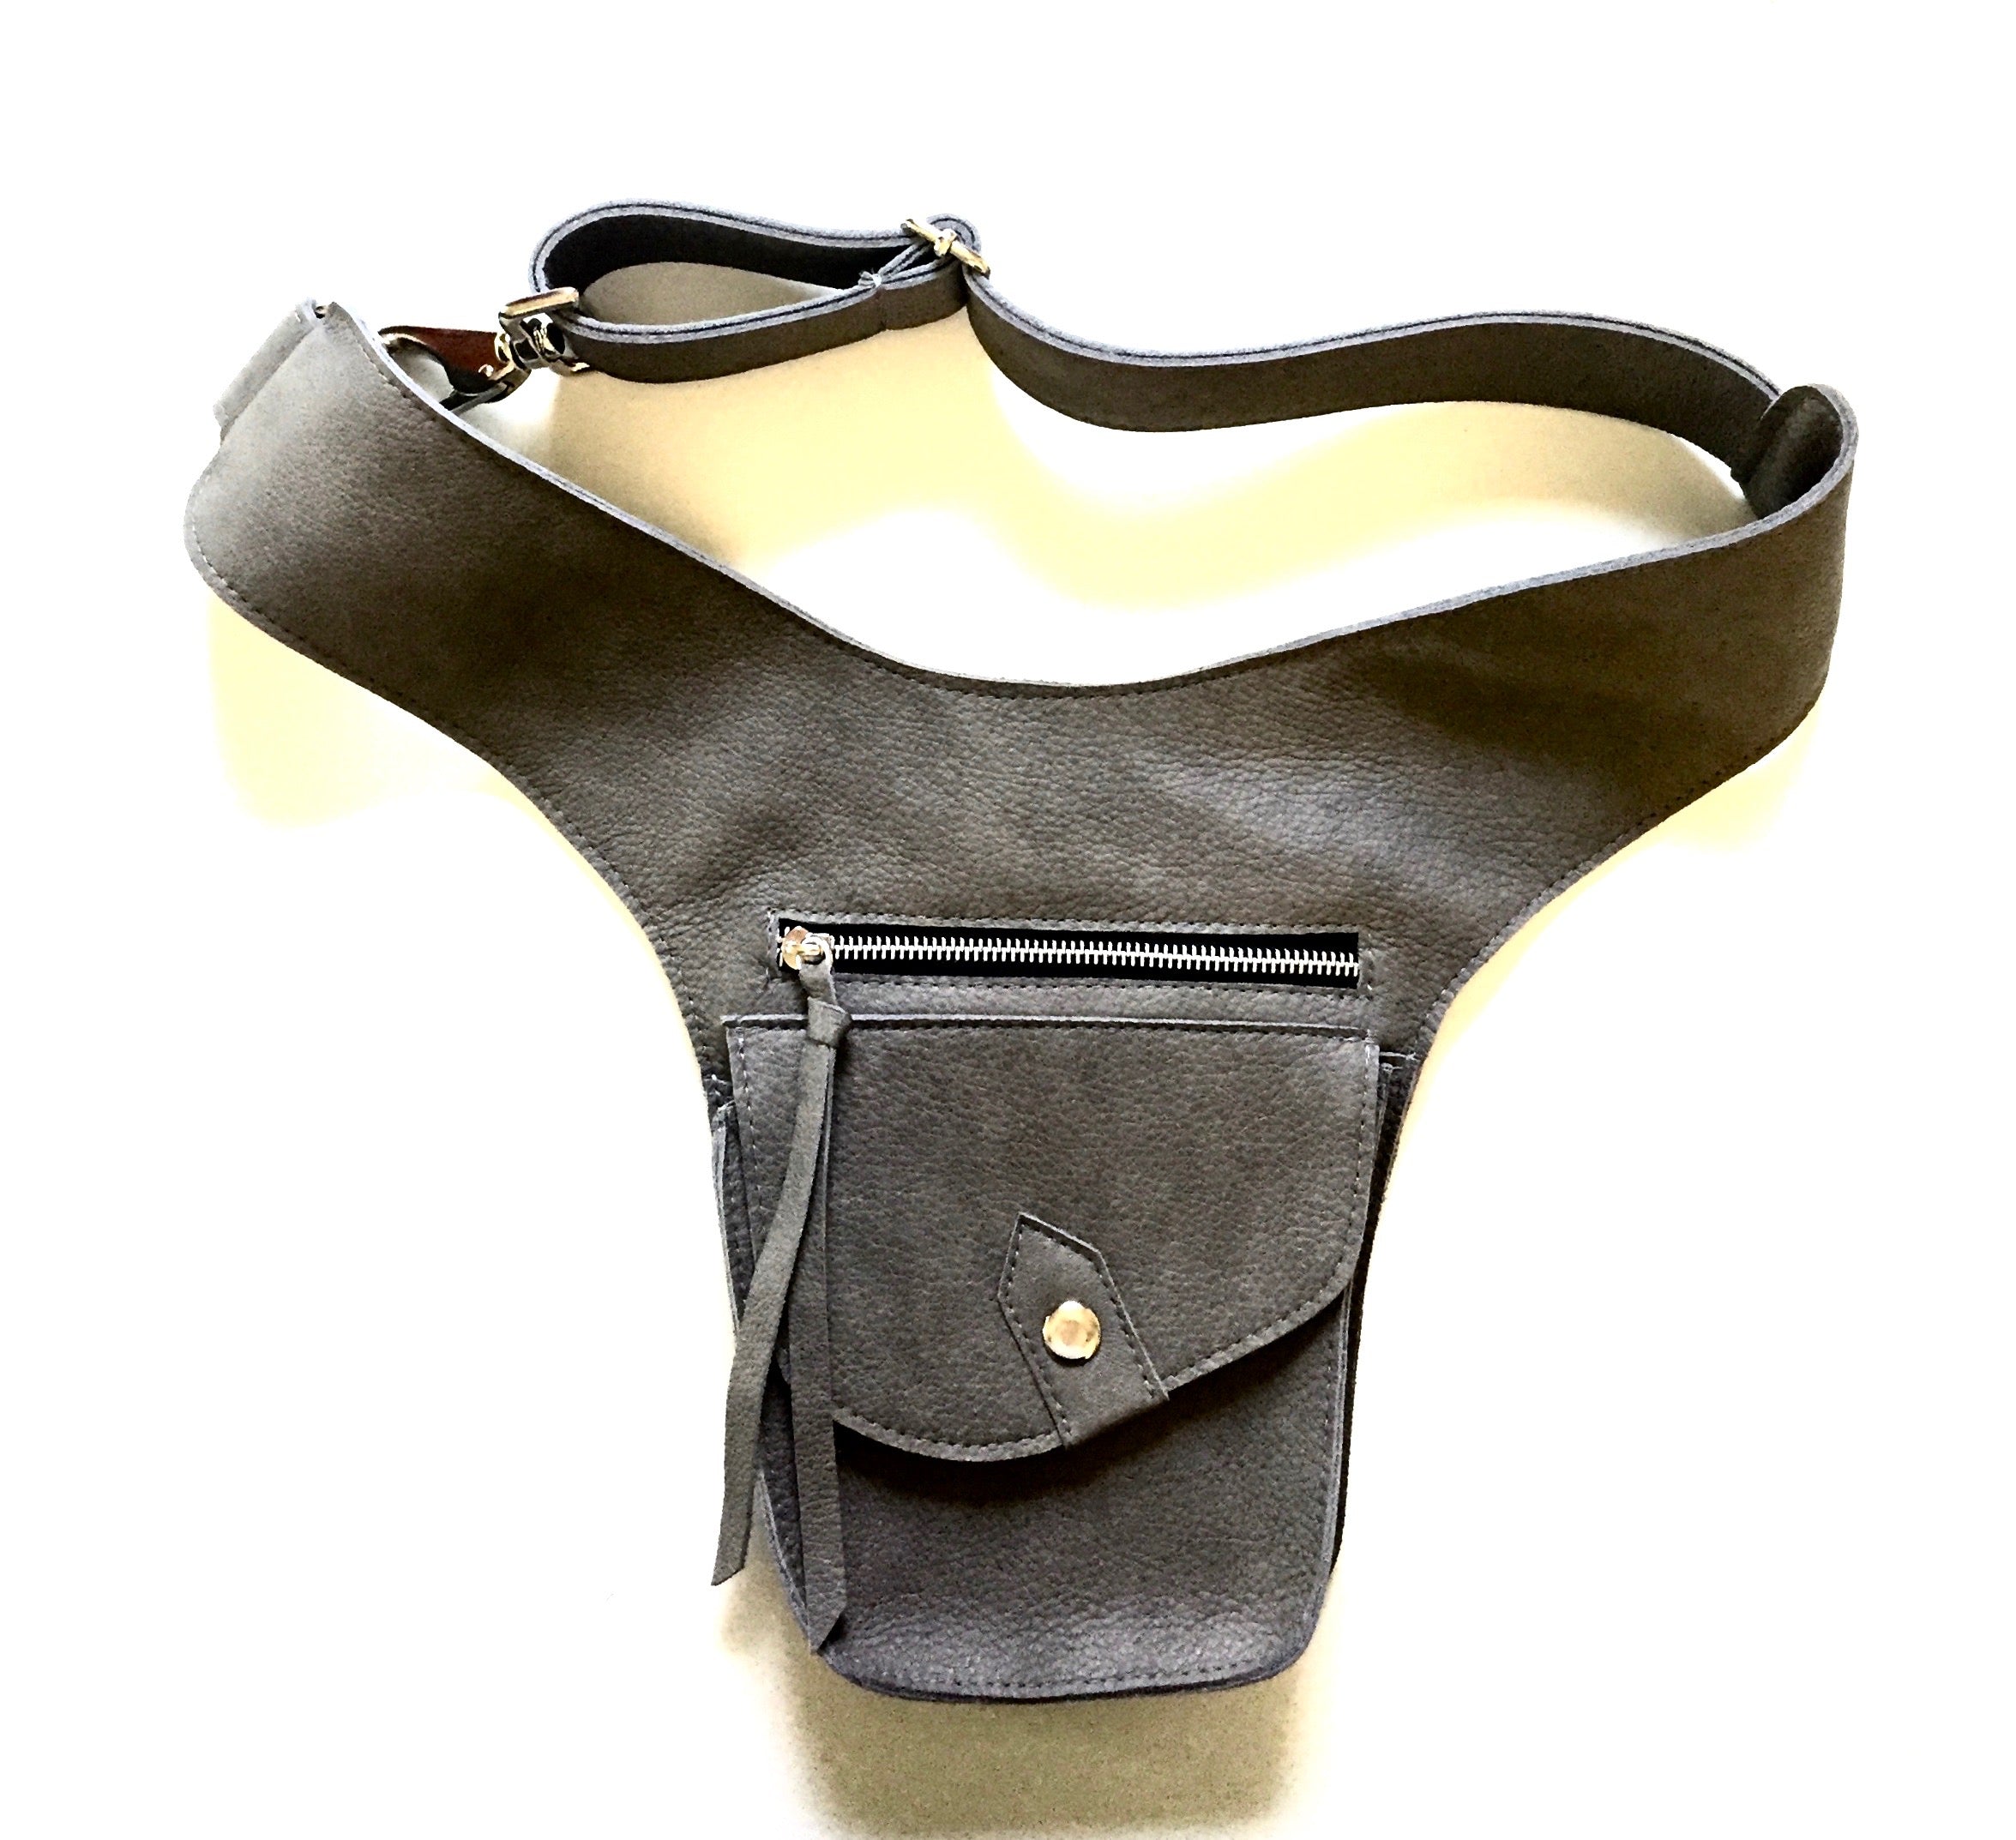 RIDE HOLSTER | Equestrian Leather Bag | Holster Bag For Phone and Wallet | Waist Bag - AtelierCG™